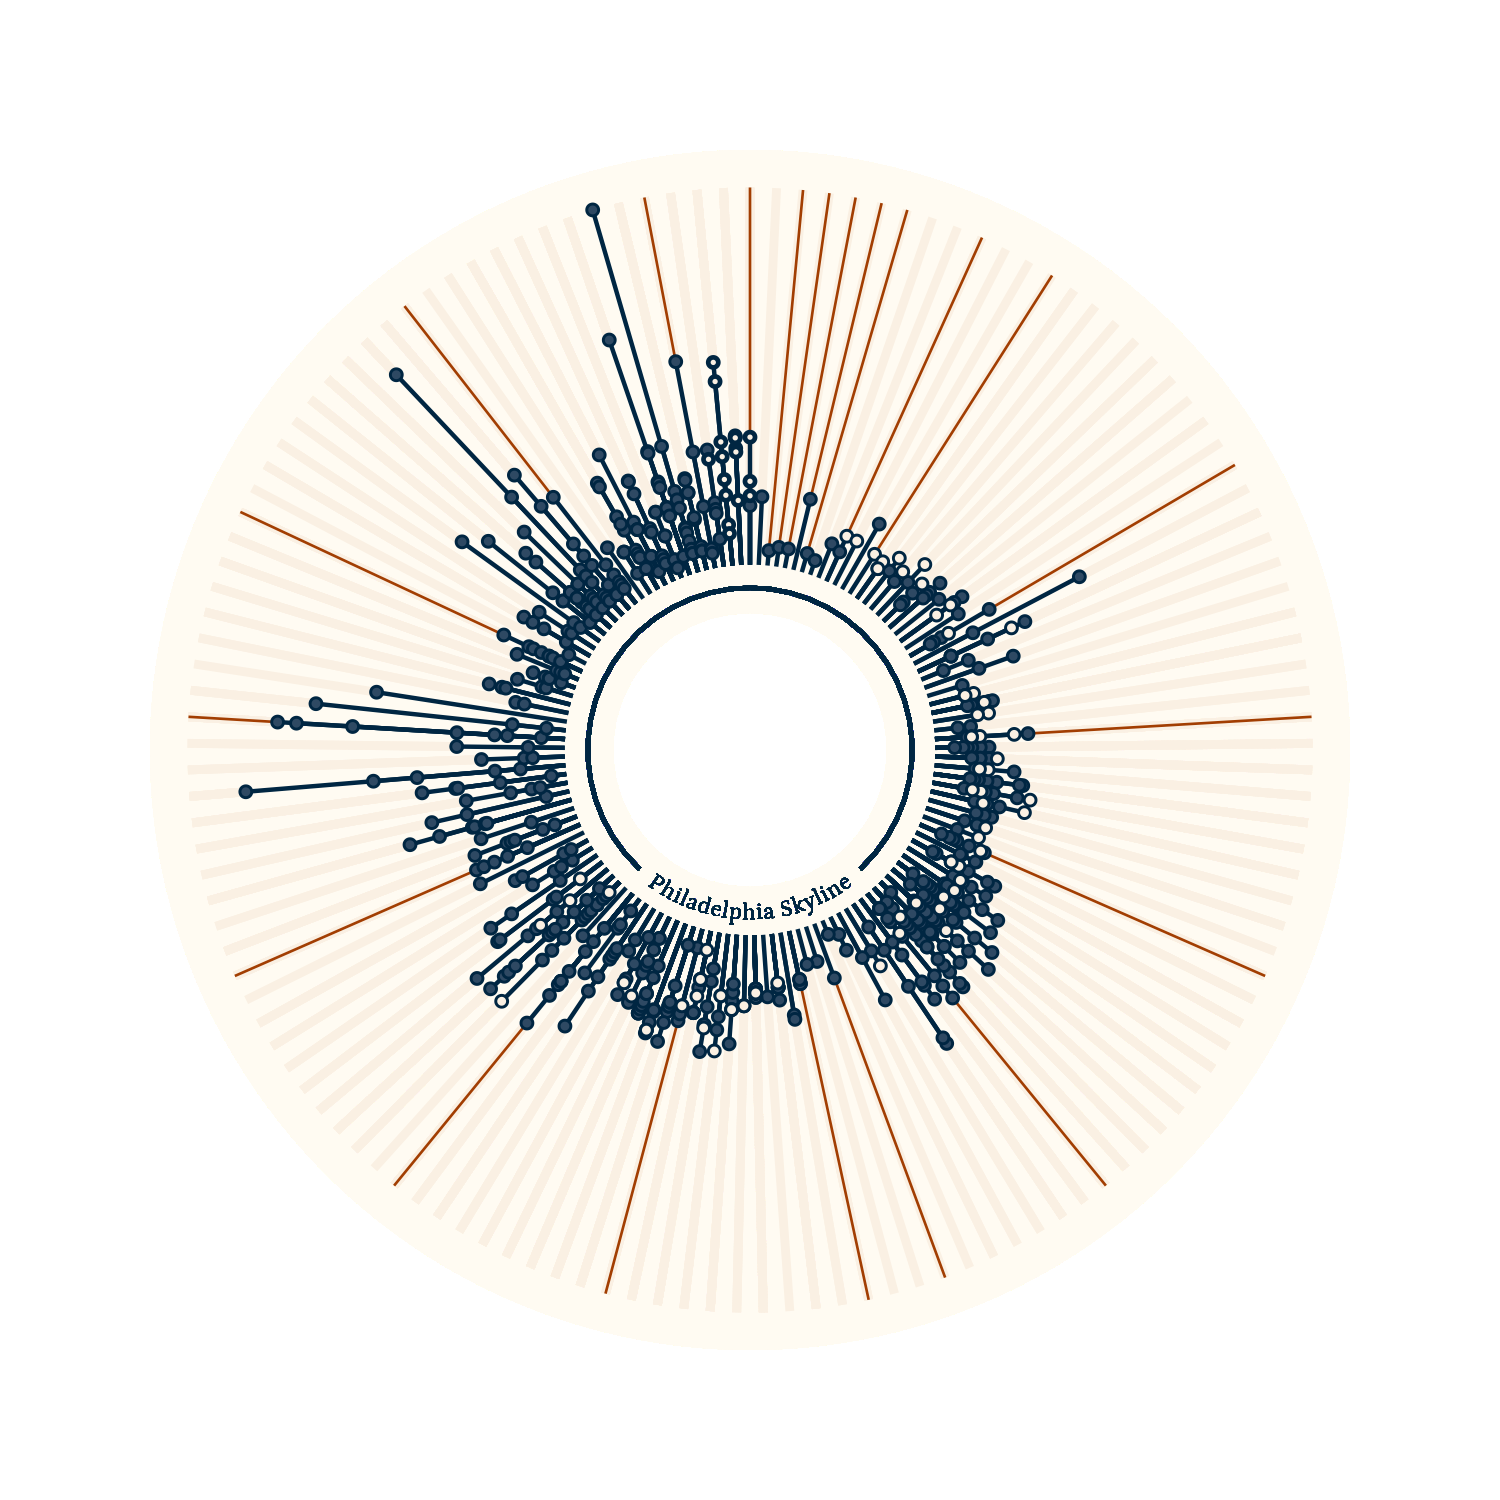 Abstract data visualization depicting tall buildings in Philadelphia as a circle. The text inside the circle reads Philadelphia Skyline